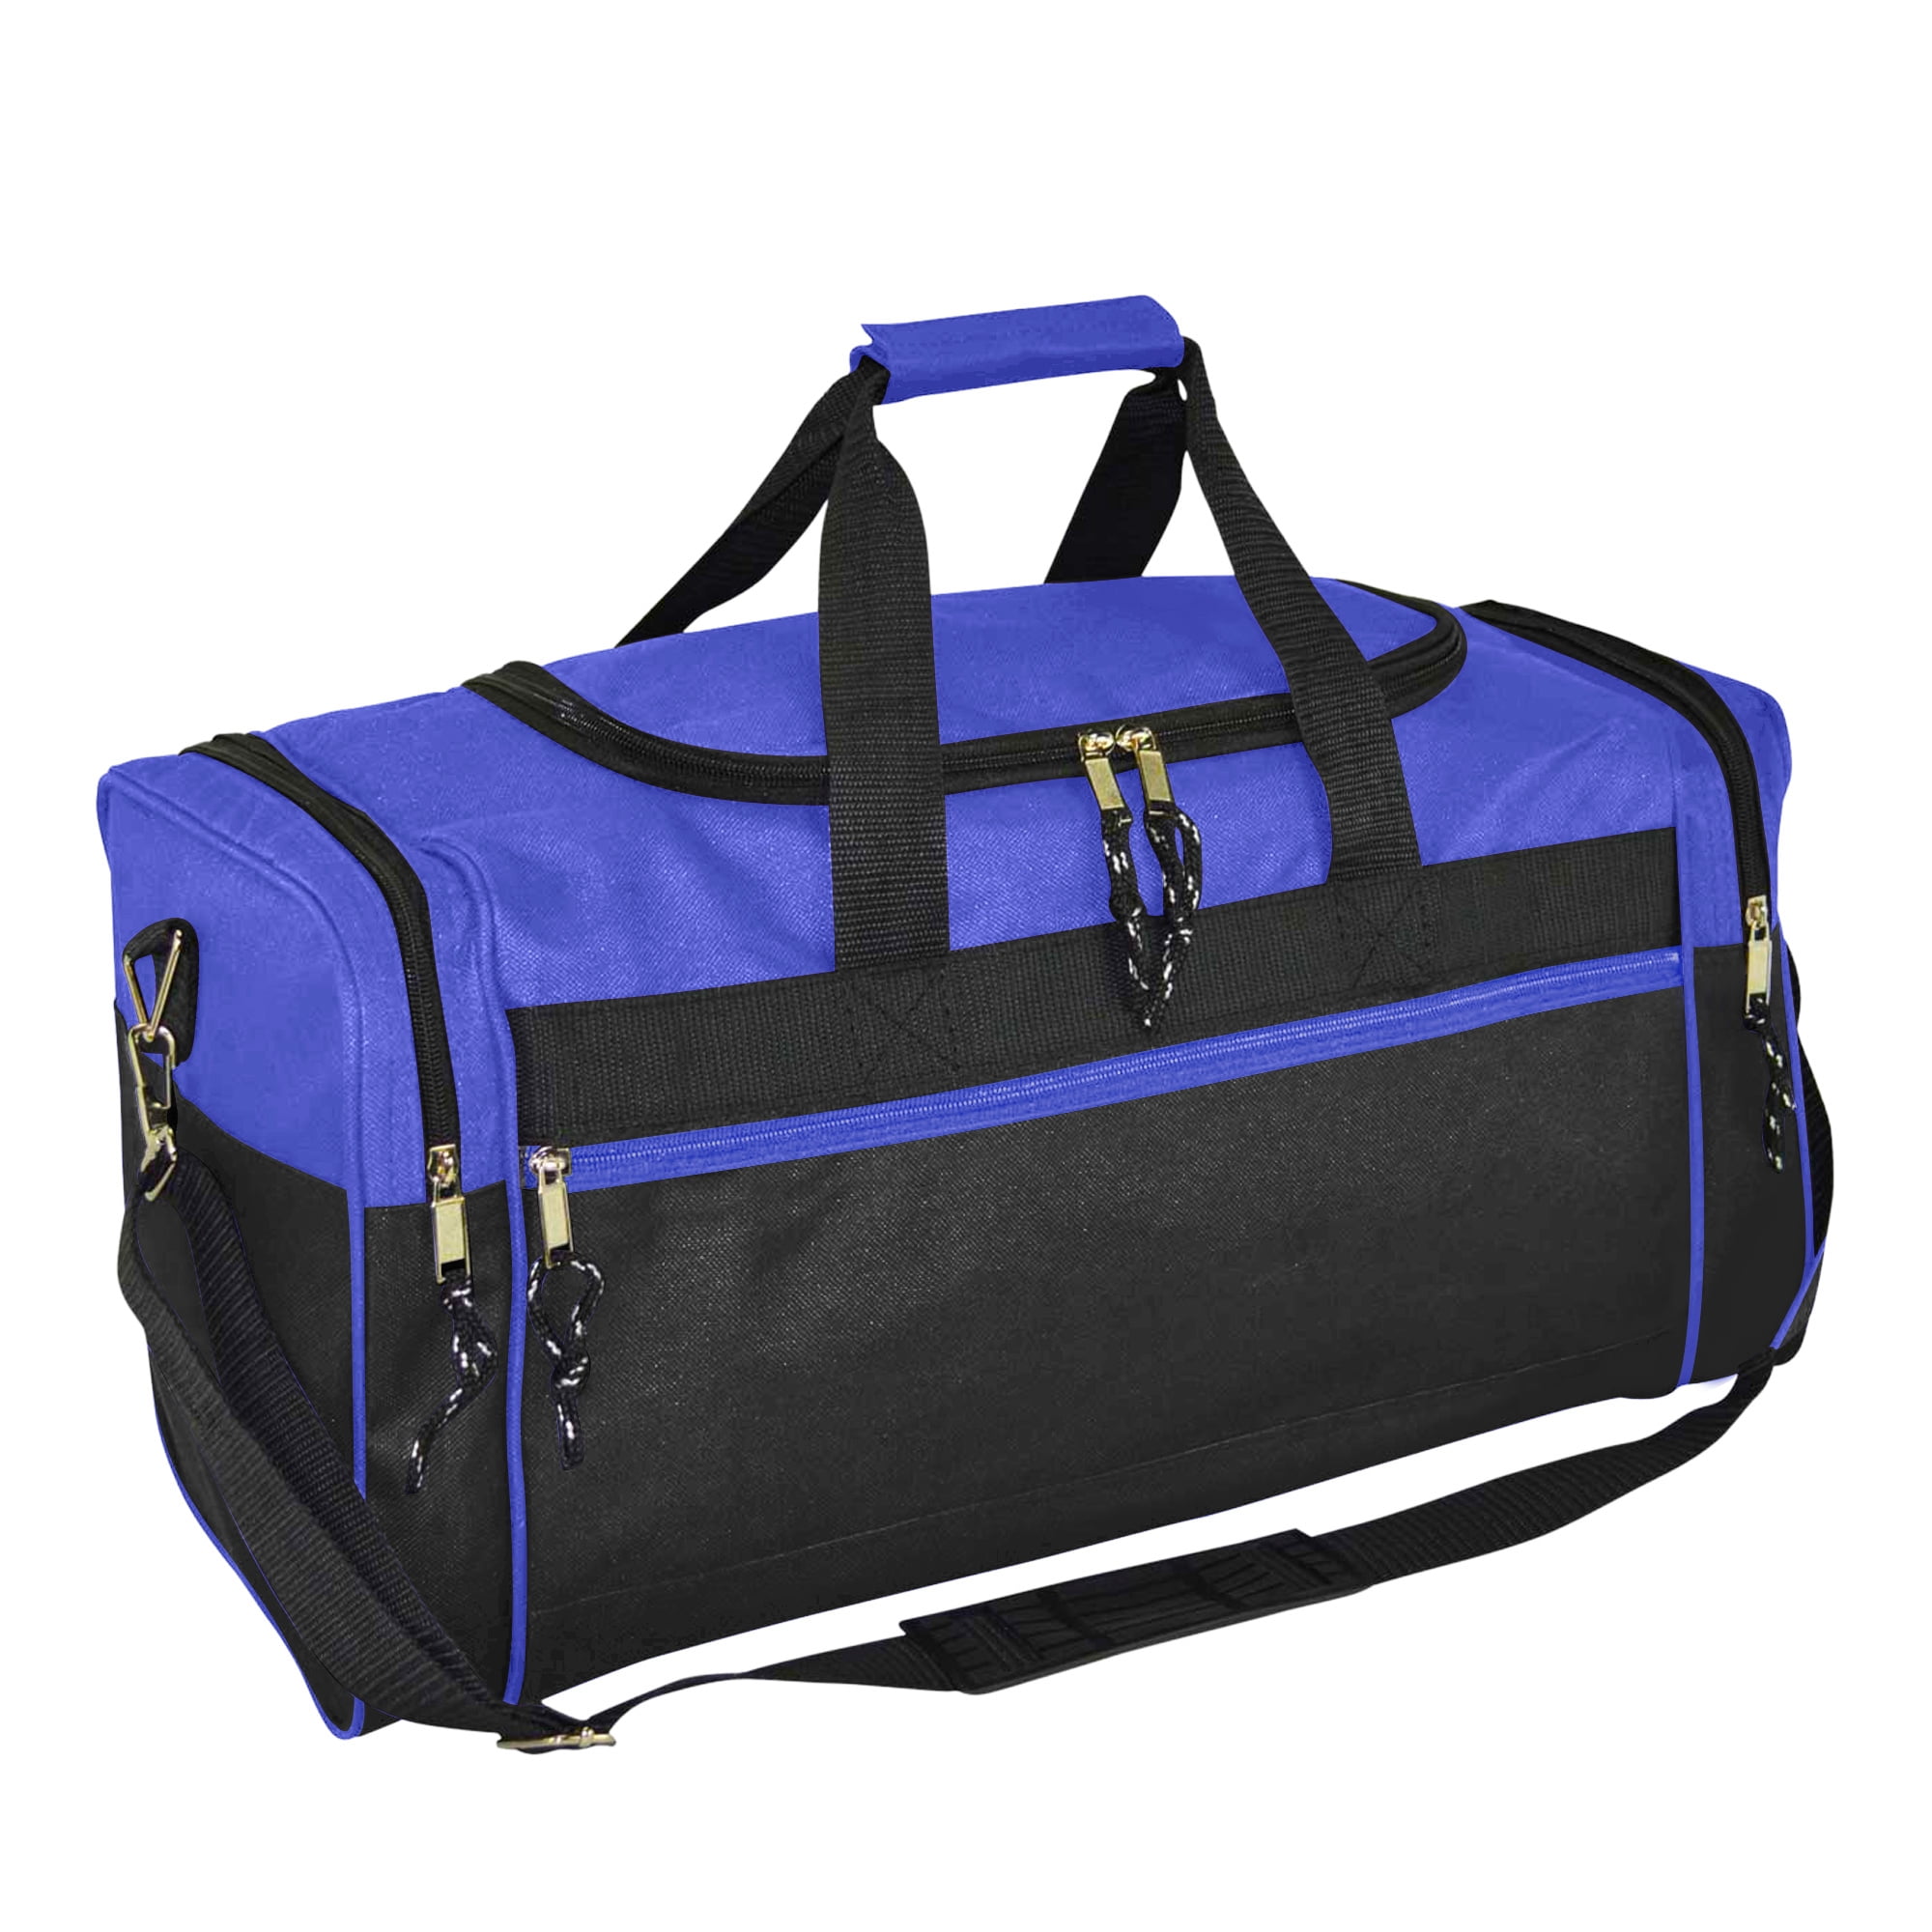 Gym duffle bag - Let's have fun